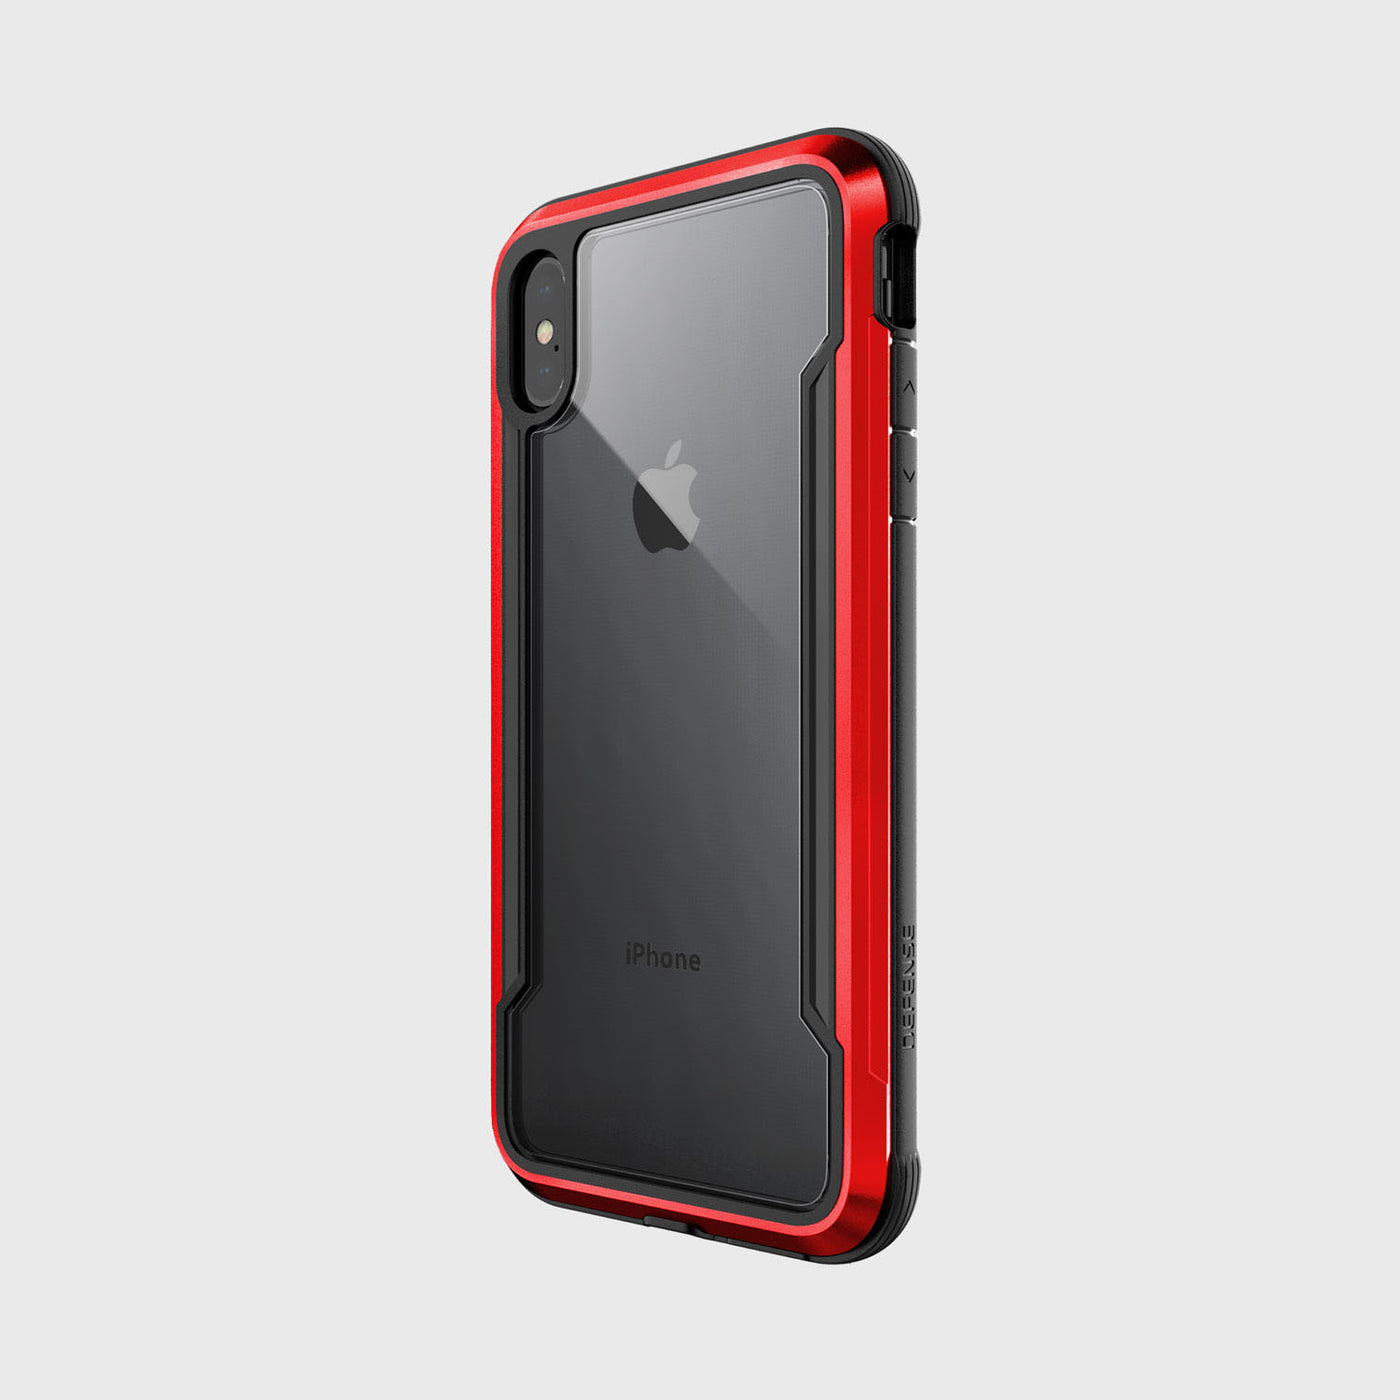 Rugged Case for iPhone XS Max. Raptic Shield in red.